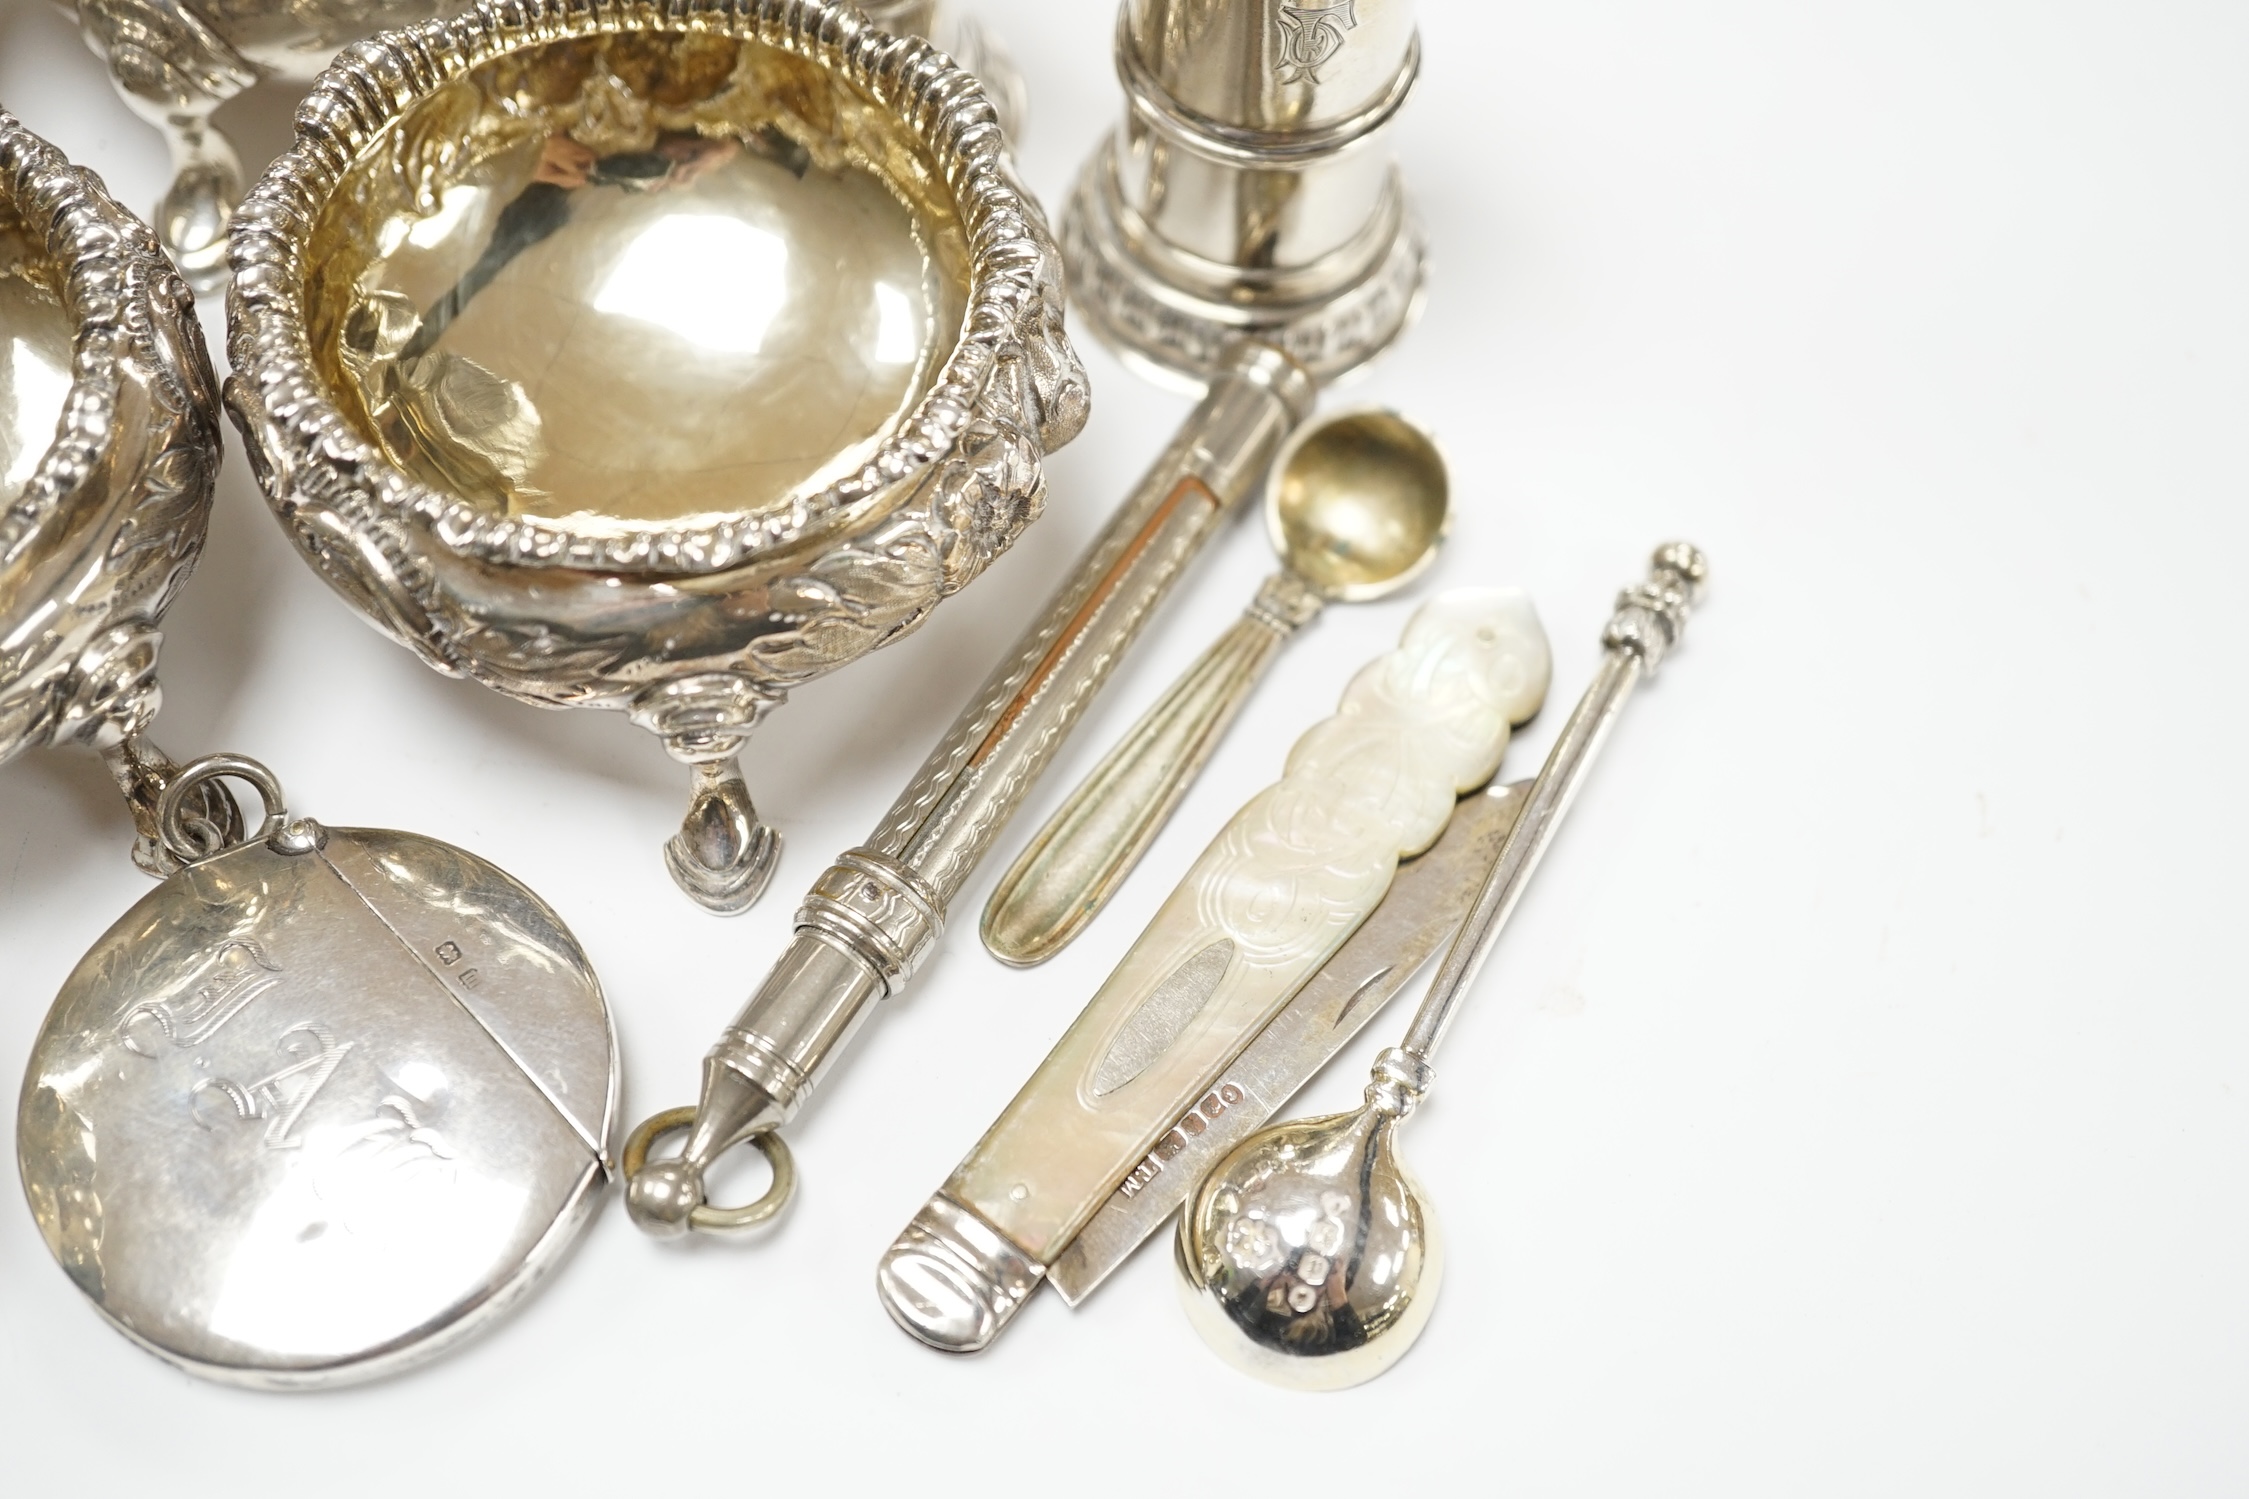 A pair of George II silver bun salts, London, 1735, diameter 60mm, a later pair of Victorian silver salts, a pair of Edwardian silver pepperettes by William Comyns and sundry other items including a circular silver vesta